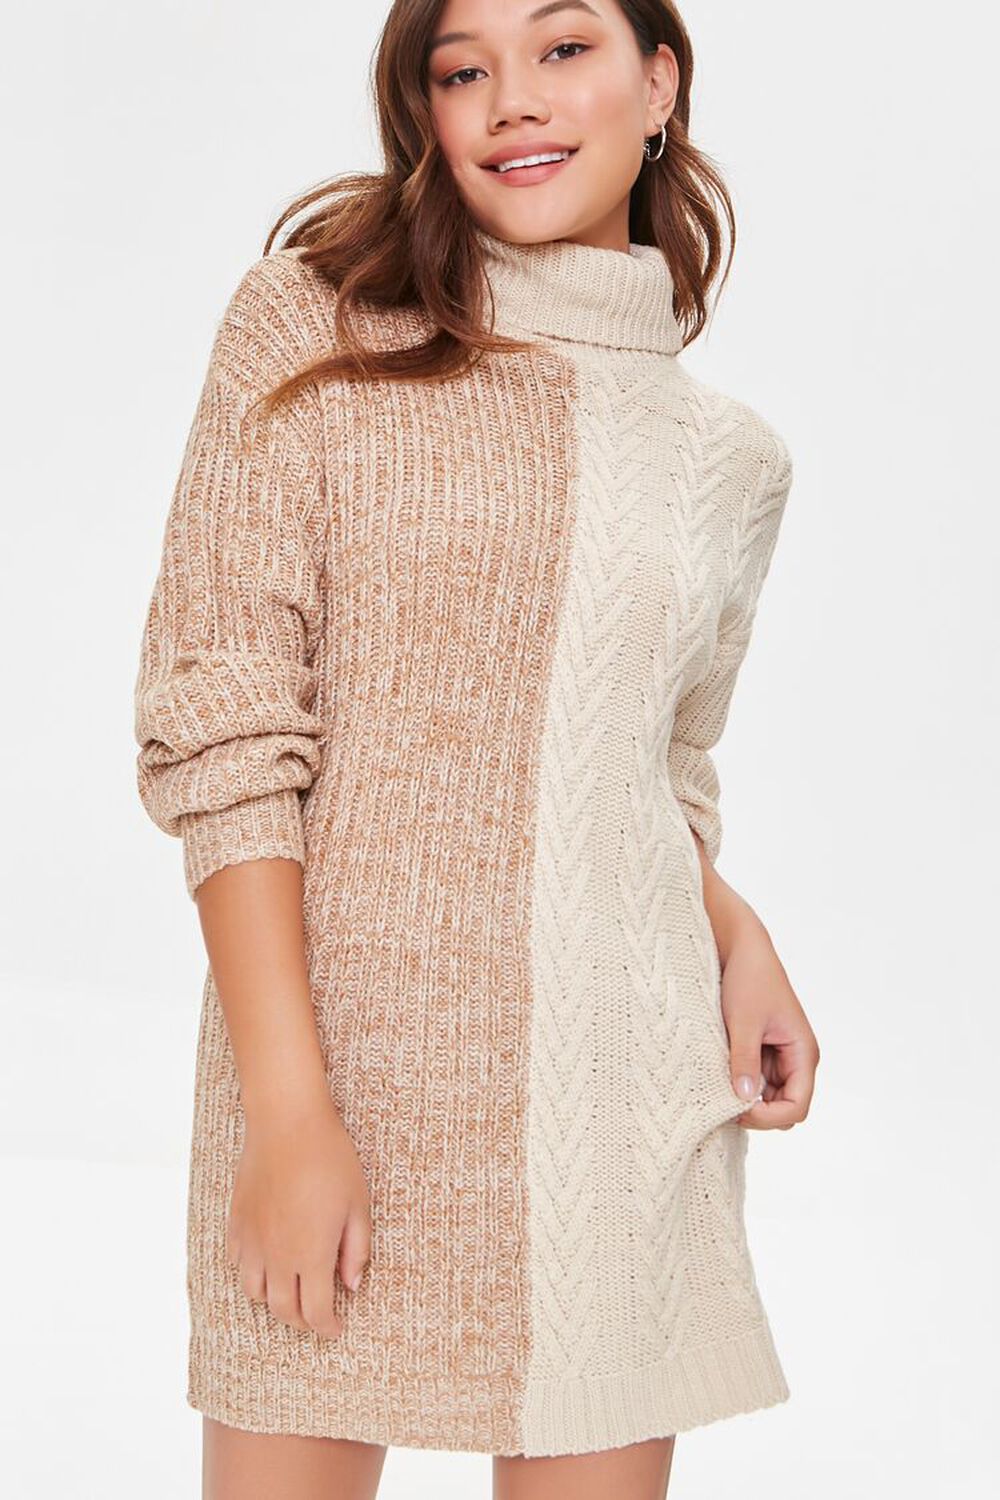 TAUPE/IVORY Cable Knit Sweater Dress, image 1